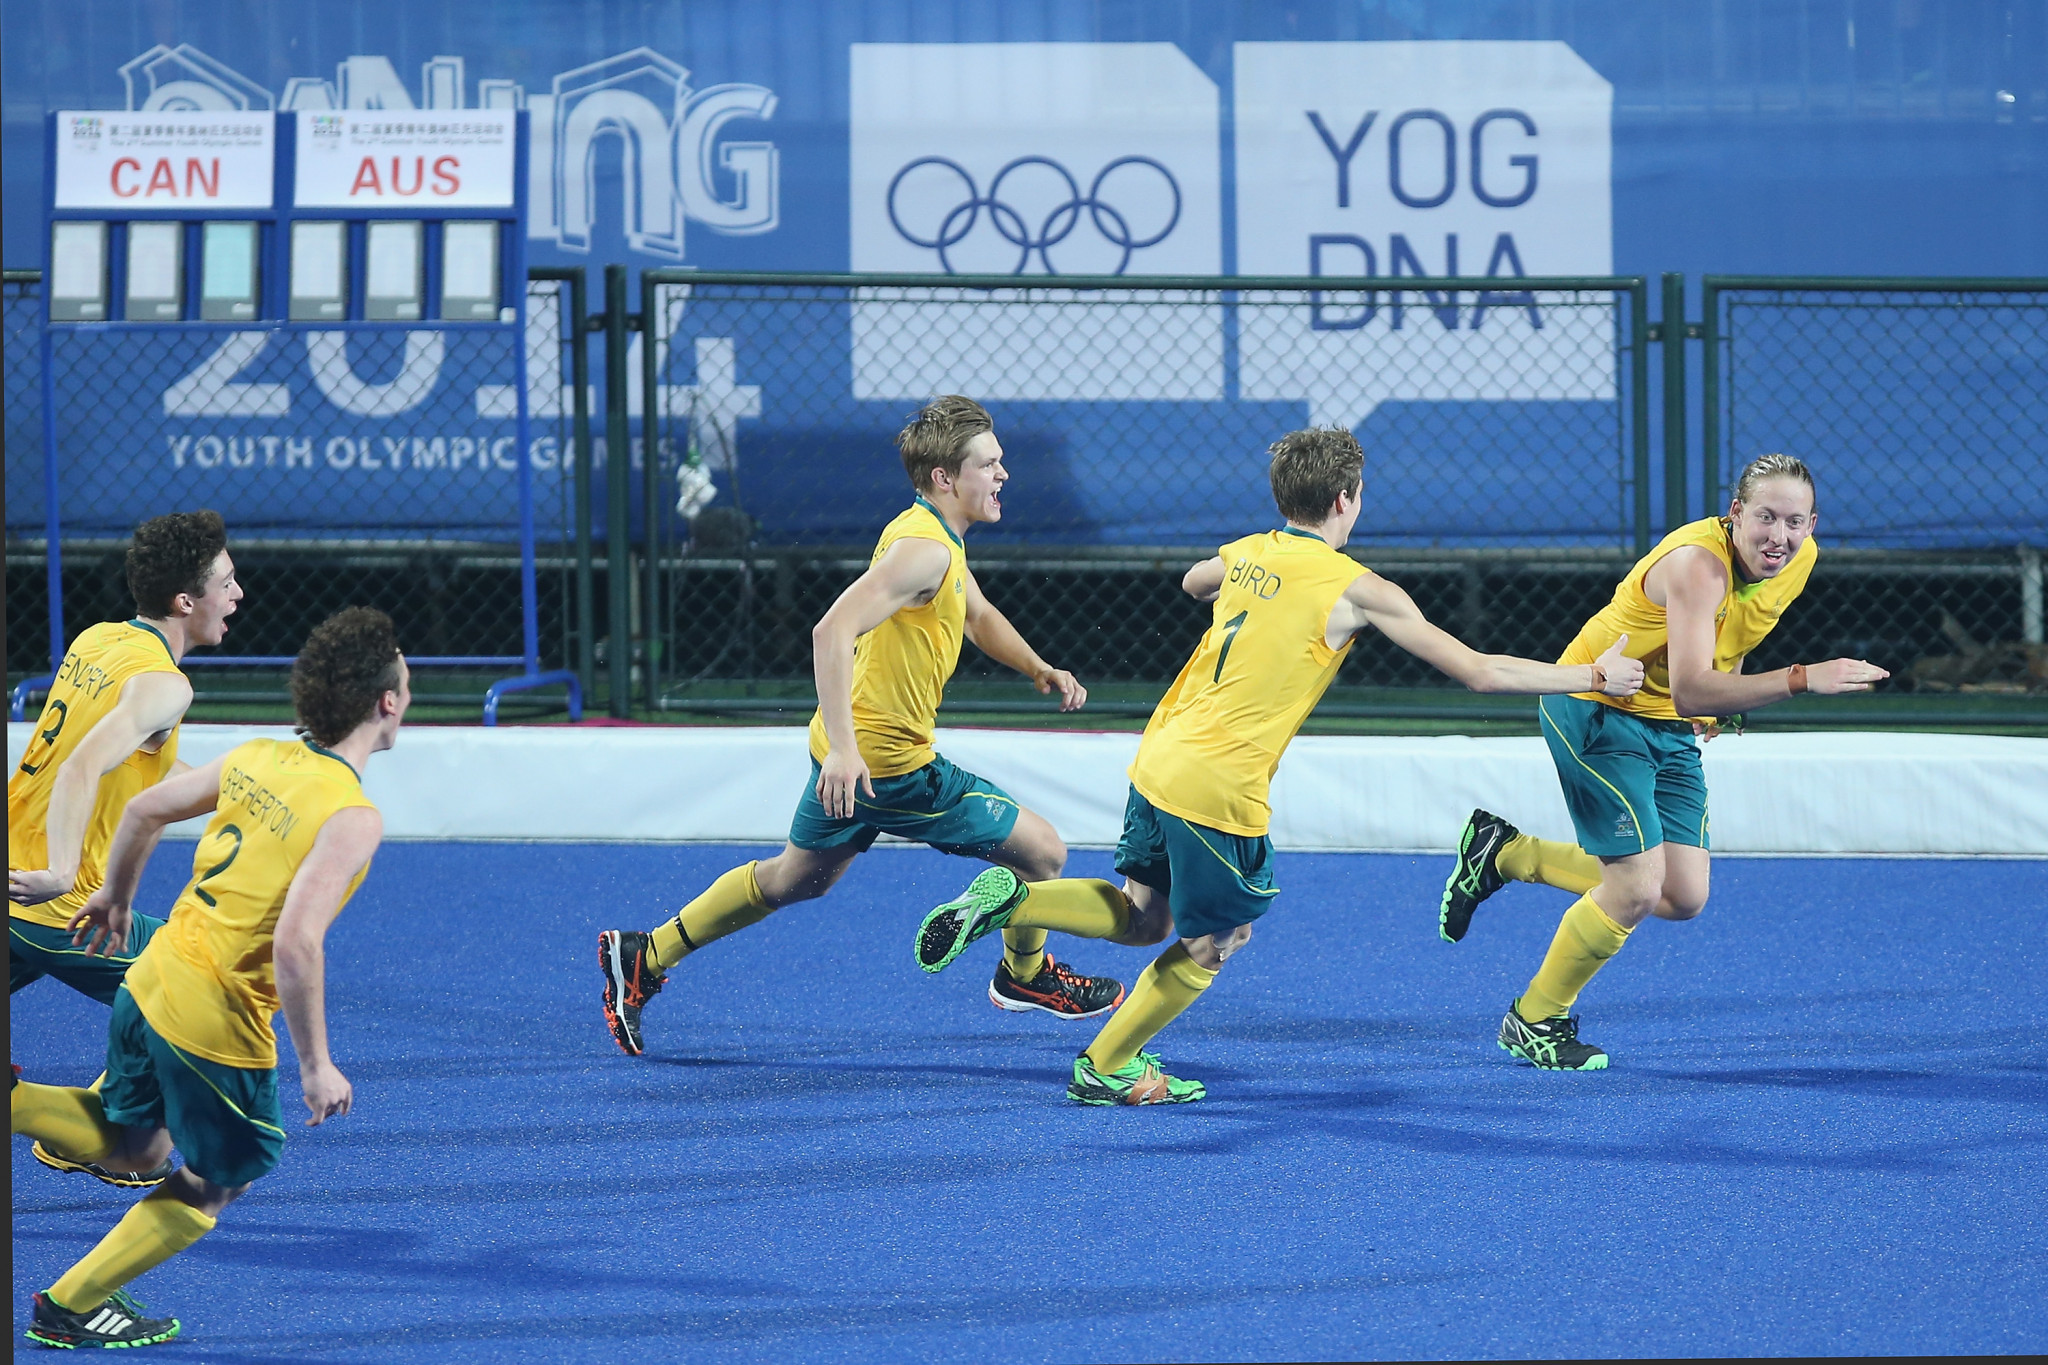 Hockey5s made its Youth Olympic Games debut at Nanjing 2014 in China ©Getty Images